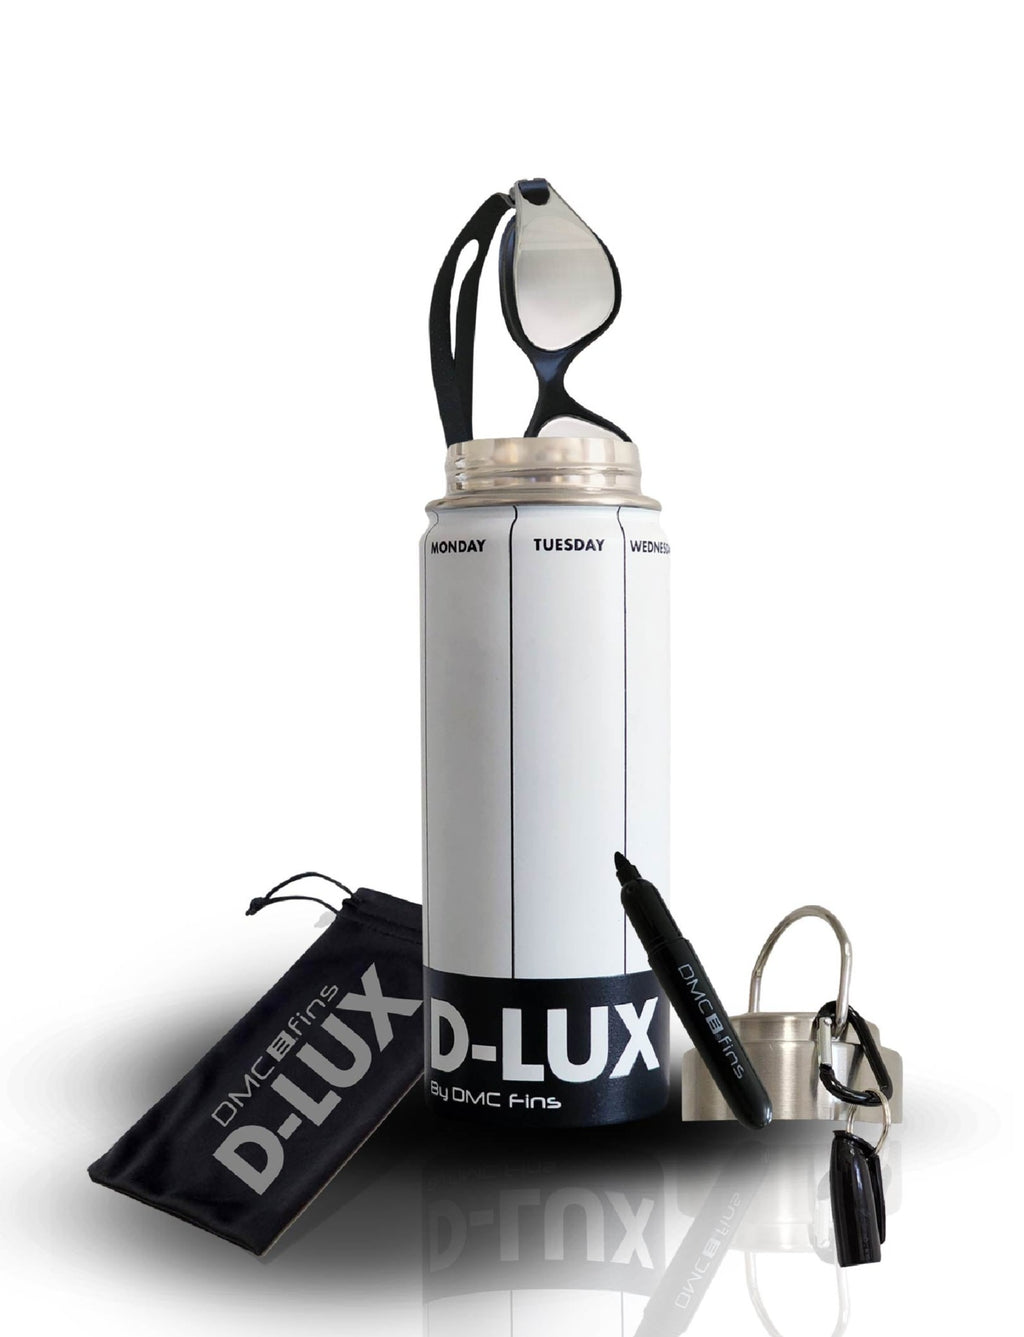 1 DEMO D-LUX Goggles-in-a-Bottle